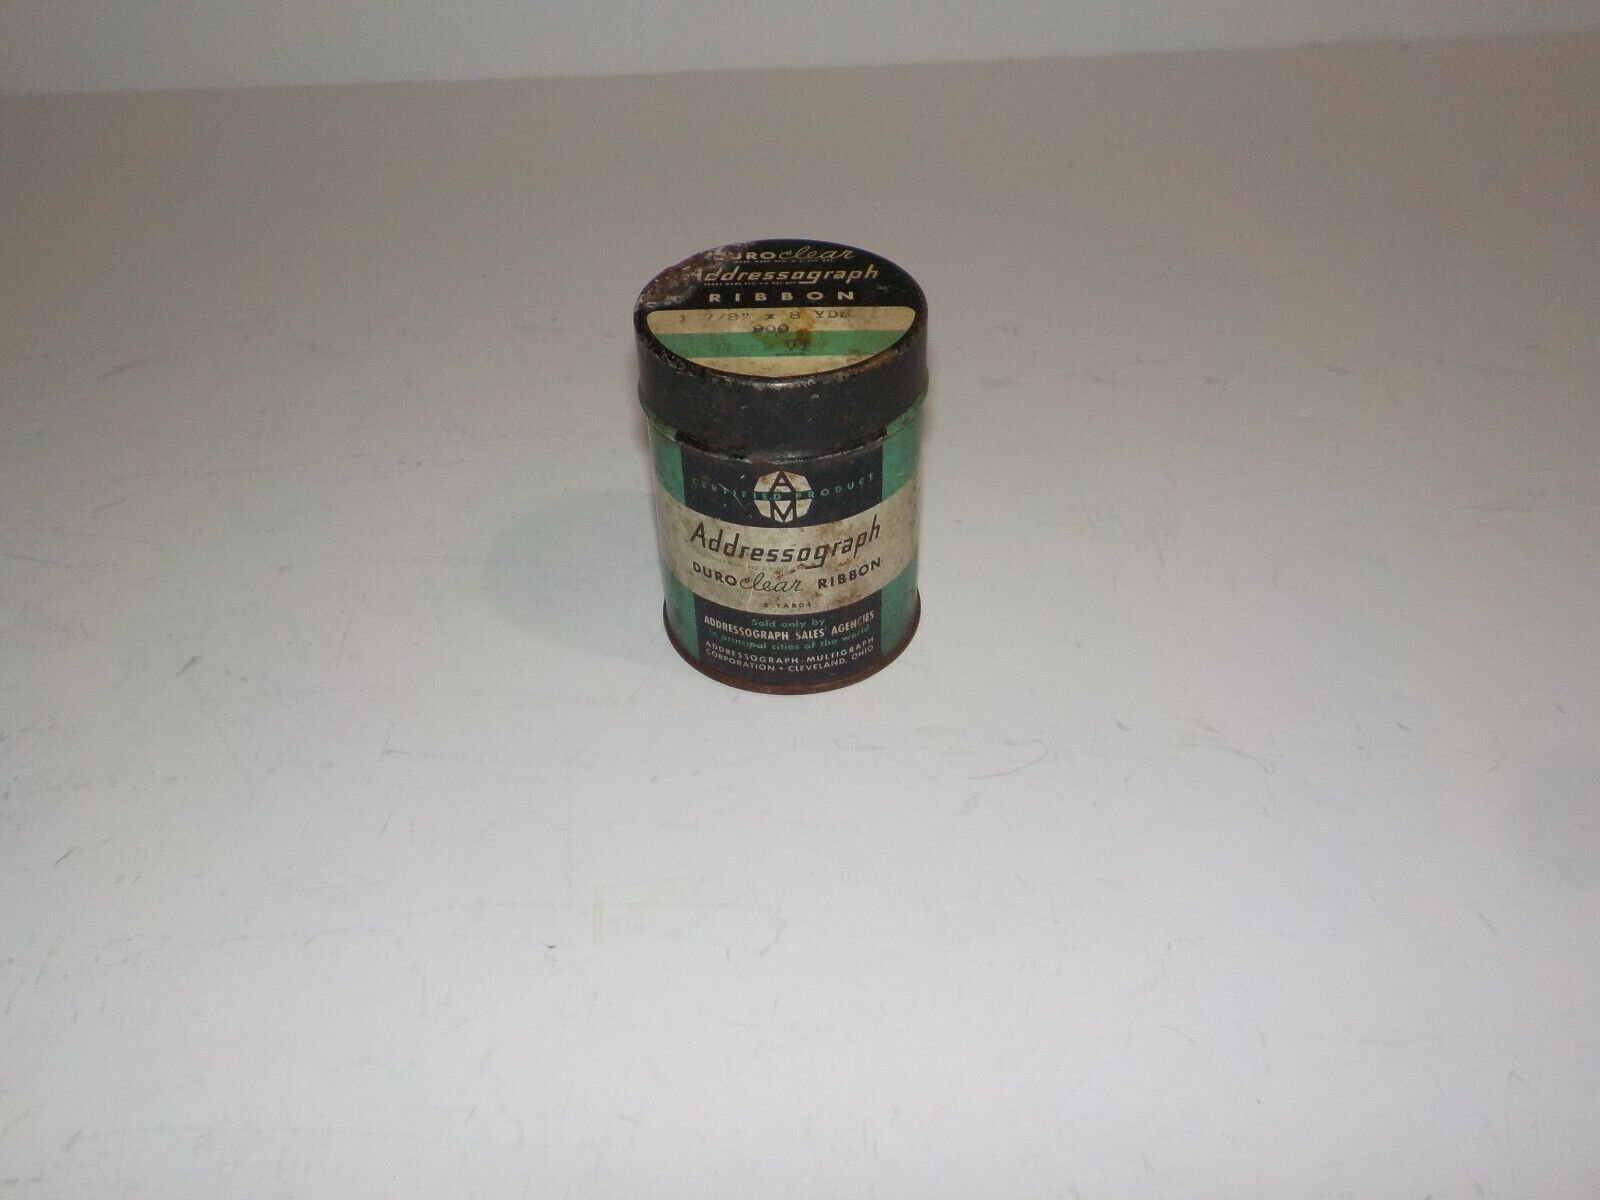 Old Vtg ADDRESSOGRAPH DURO CLEAR RIBBON CLEVELAND OHIO GREEN METAL TIN